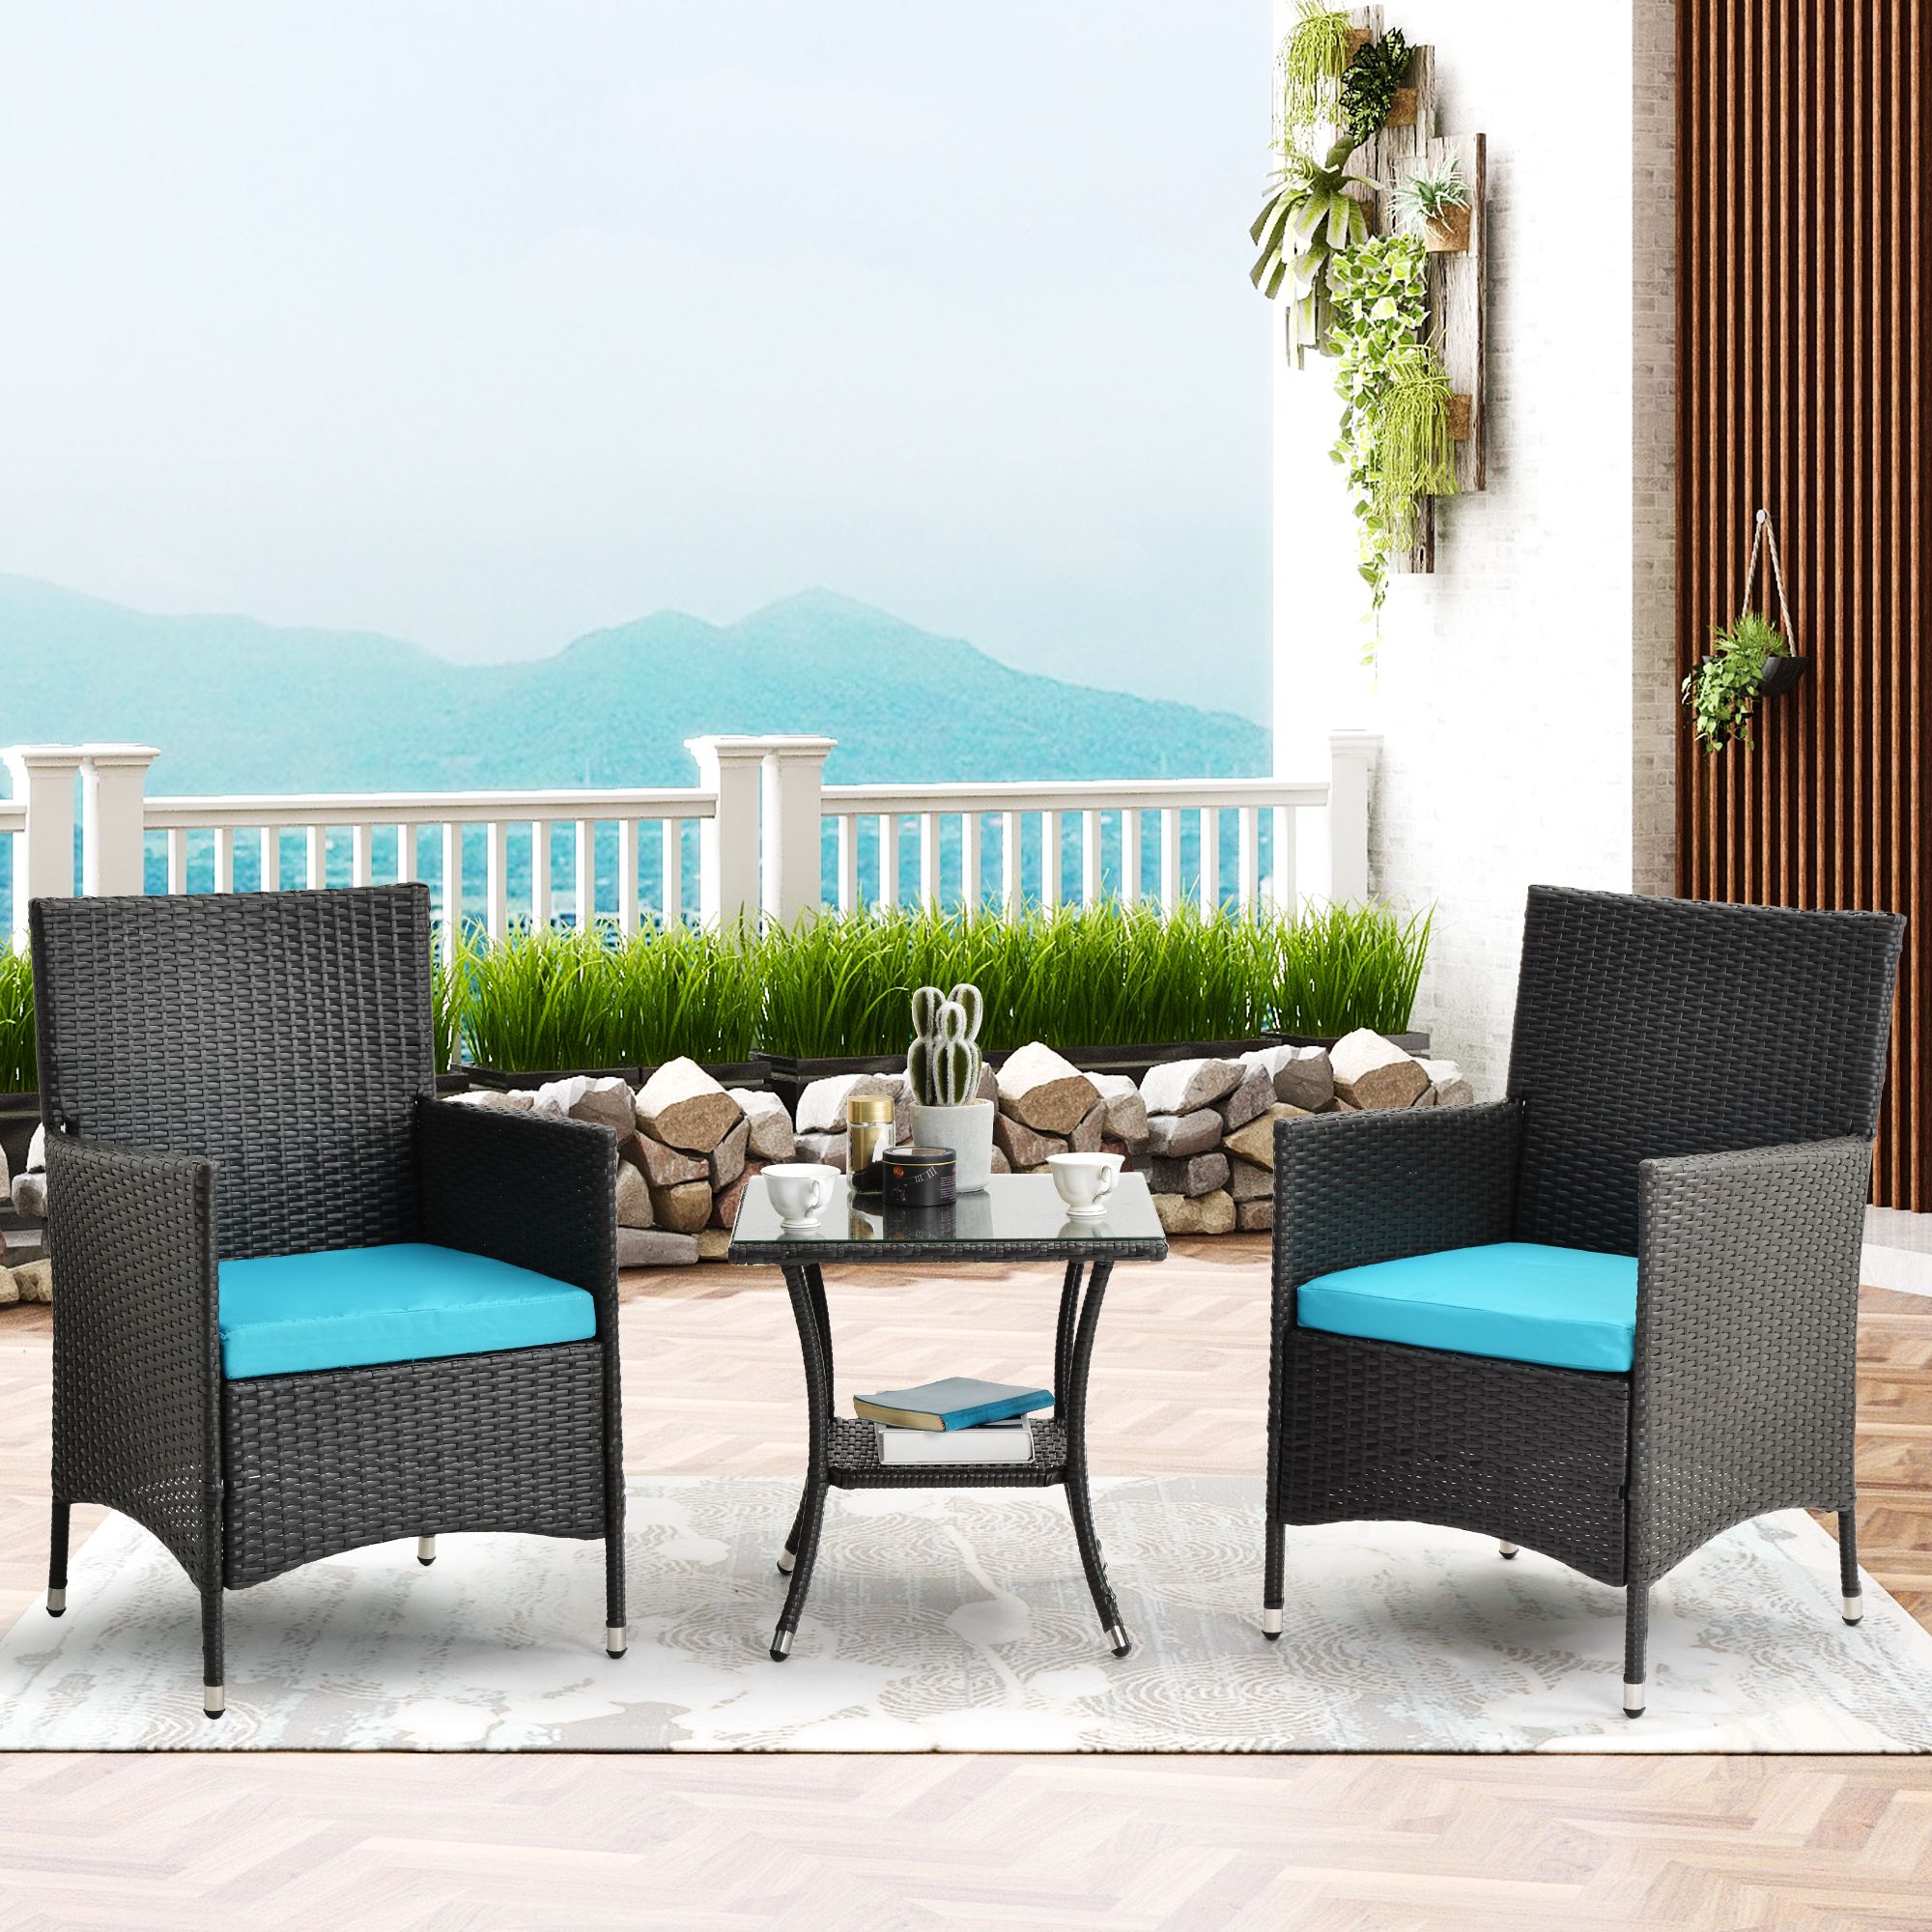 2020 Outdoor Wicker Cafe Dining Sets With Outdoor Conversation Sets, 3 Piece Wicker Patio Set With Glass Dining (View 14 of 15)